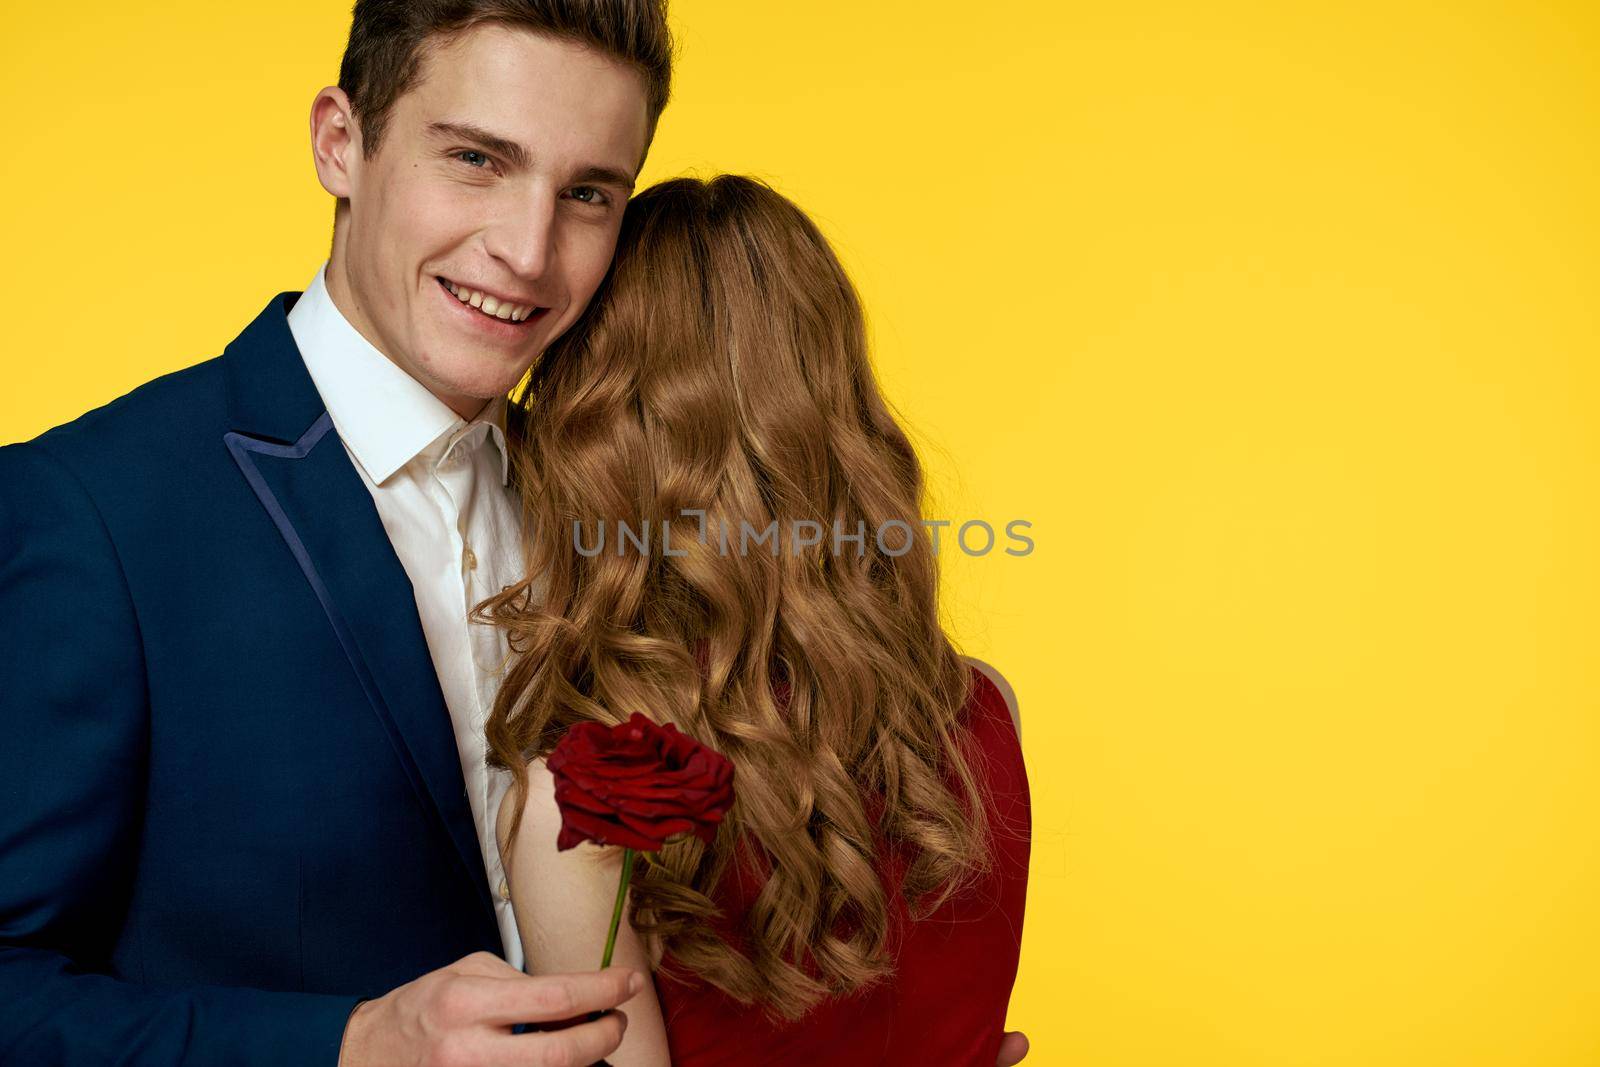 Cute couple dating hug romance yellow background by SHOTPRIME